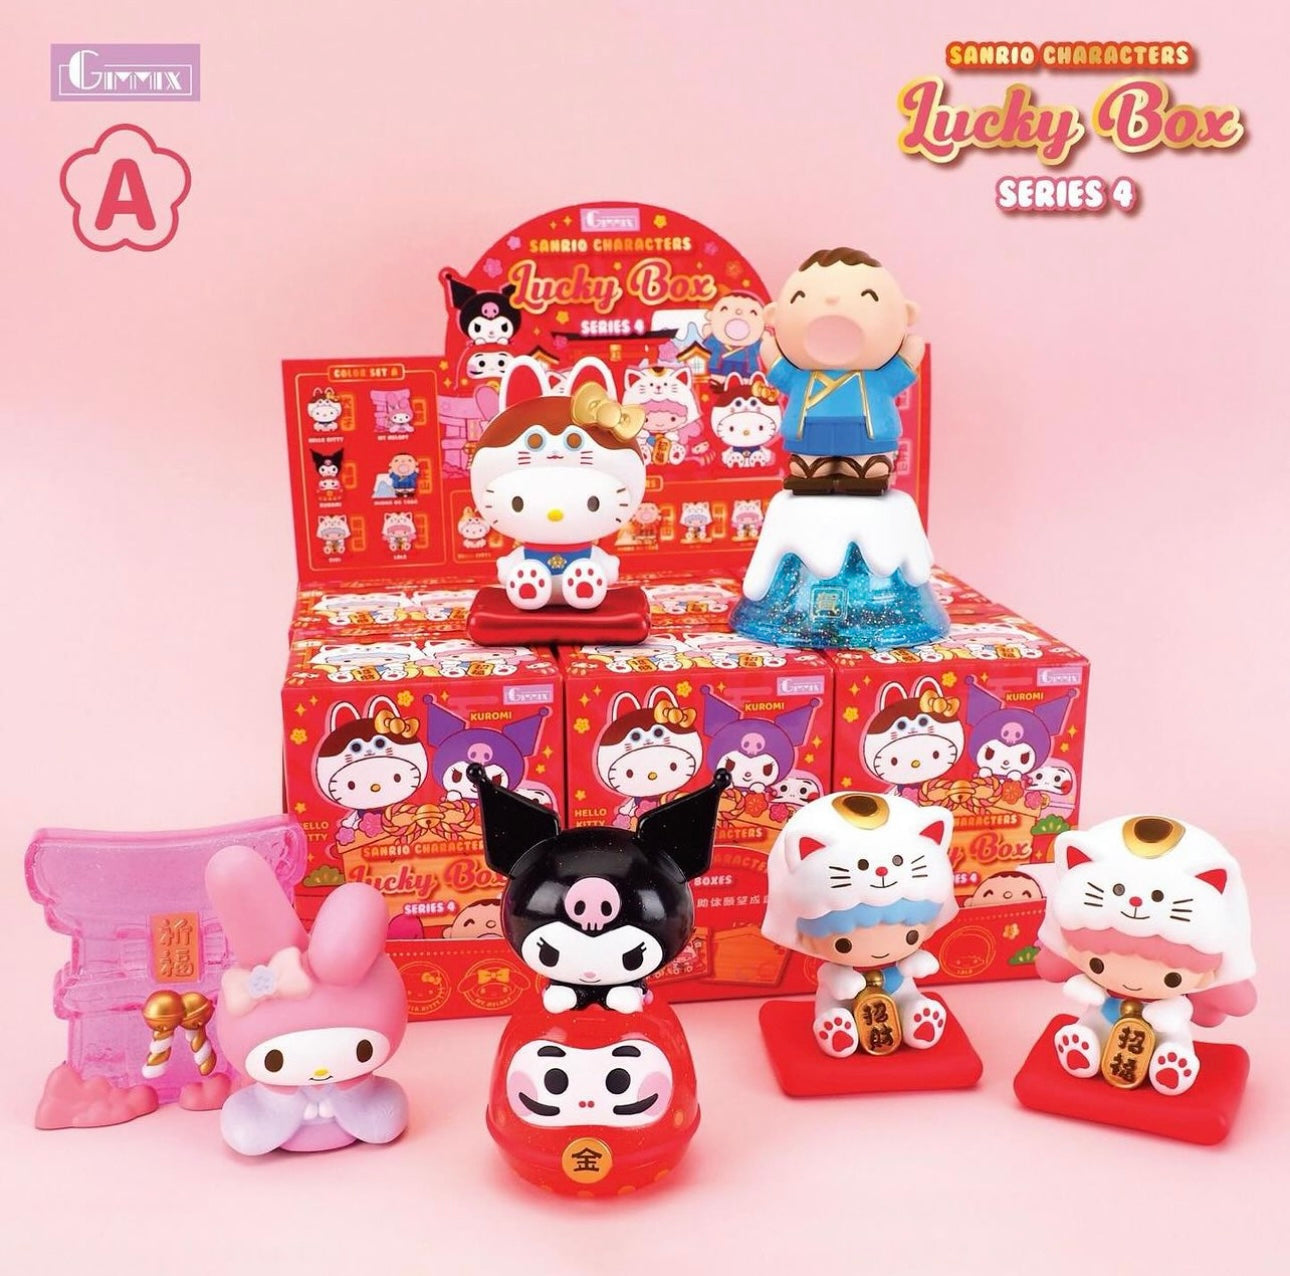 Sanrio Characters Vinly Figure Lucky Box | Series A Hello Kitty Inukoro - Kawaii Collectable Toys Mystery Blind Box